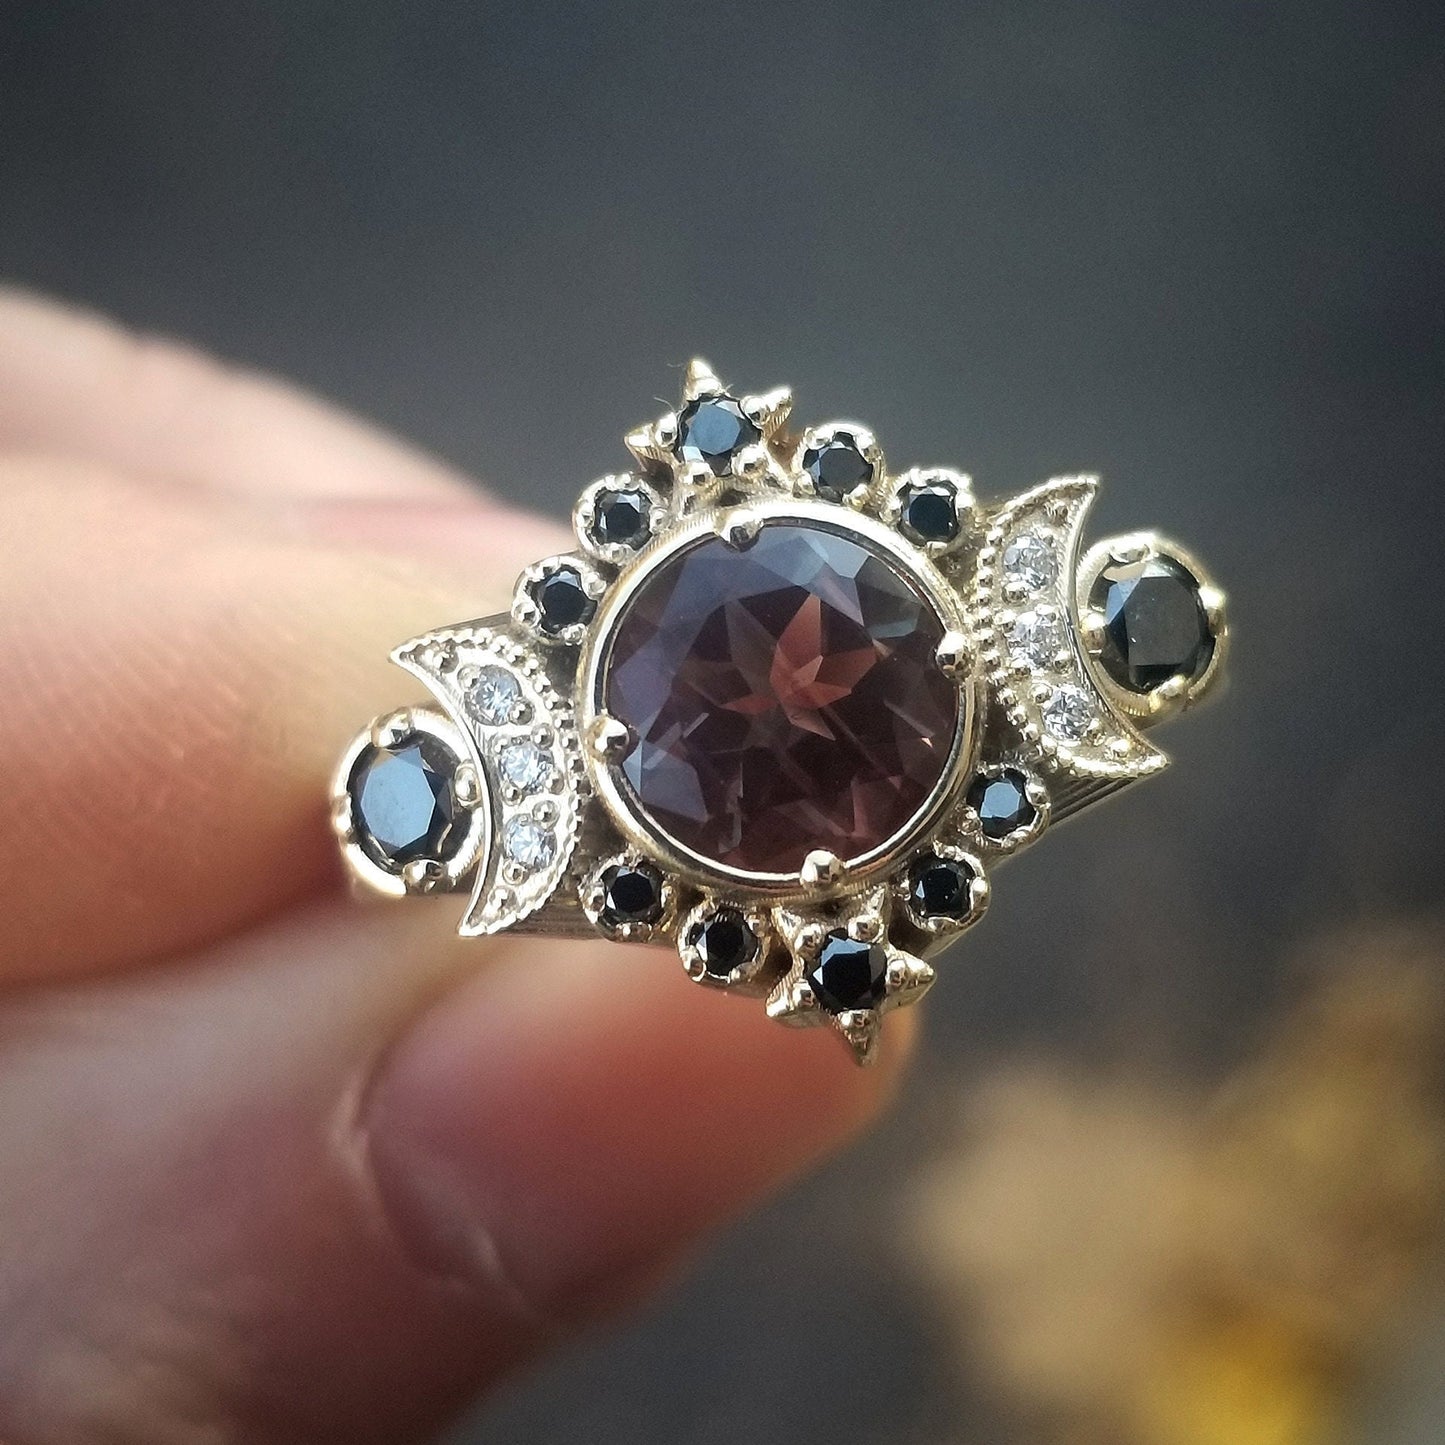 Load image into Gallery viewer, Ready to Ship Size 6 - 8  Gothic Selene Moon Engagement Ring Set - Oregon Sunstone with Black and White Diamonds - 14k Yellow Gold
